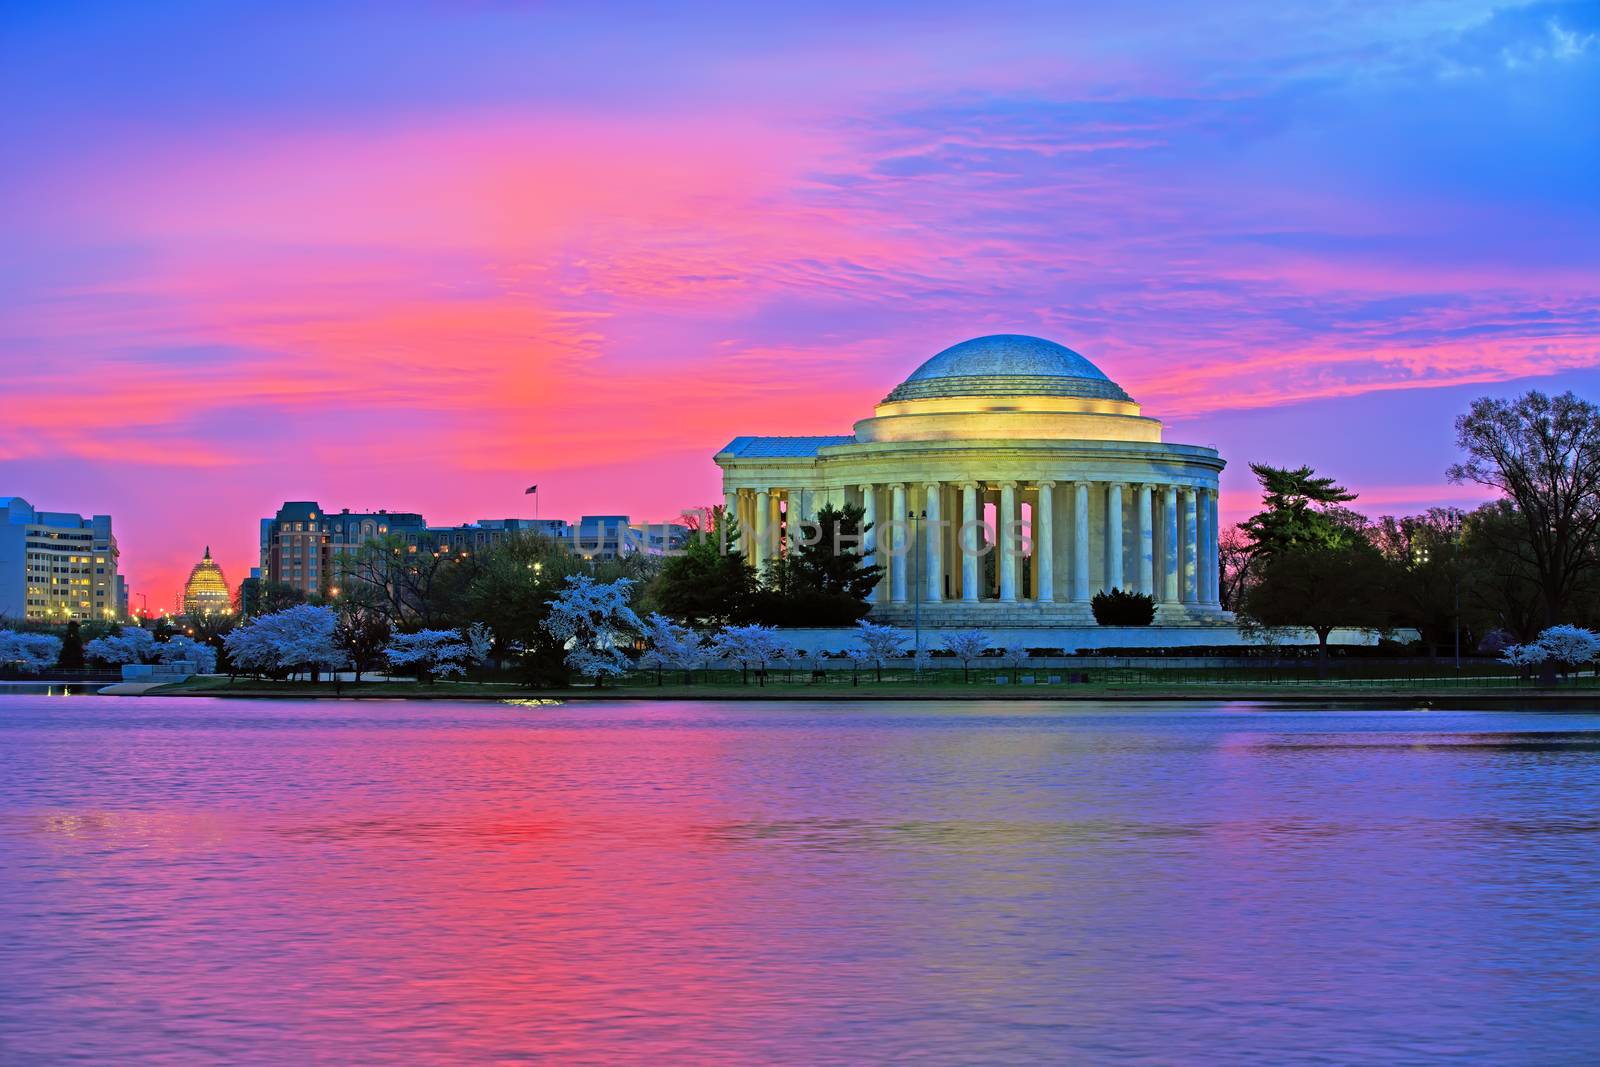 Sunrise at the Thomas Jefferson Memorial in Washington DC. The famous cherry trees are in full bloom.